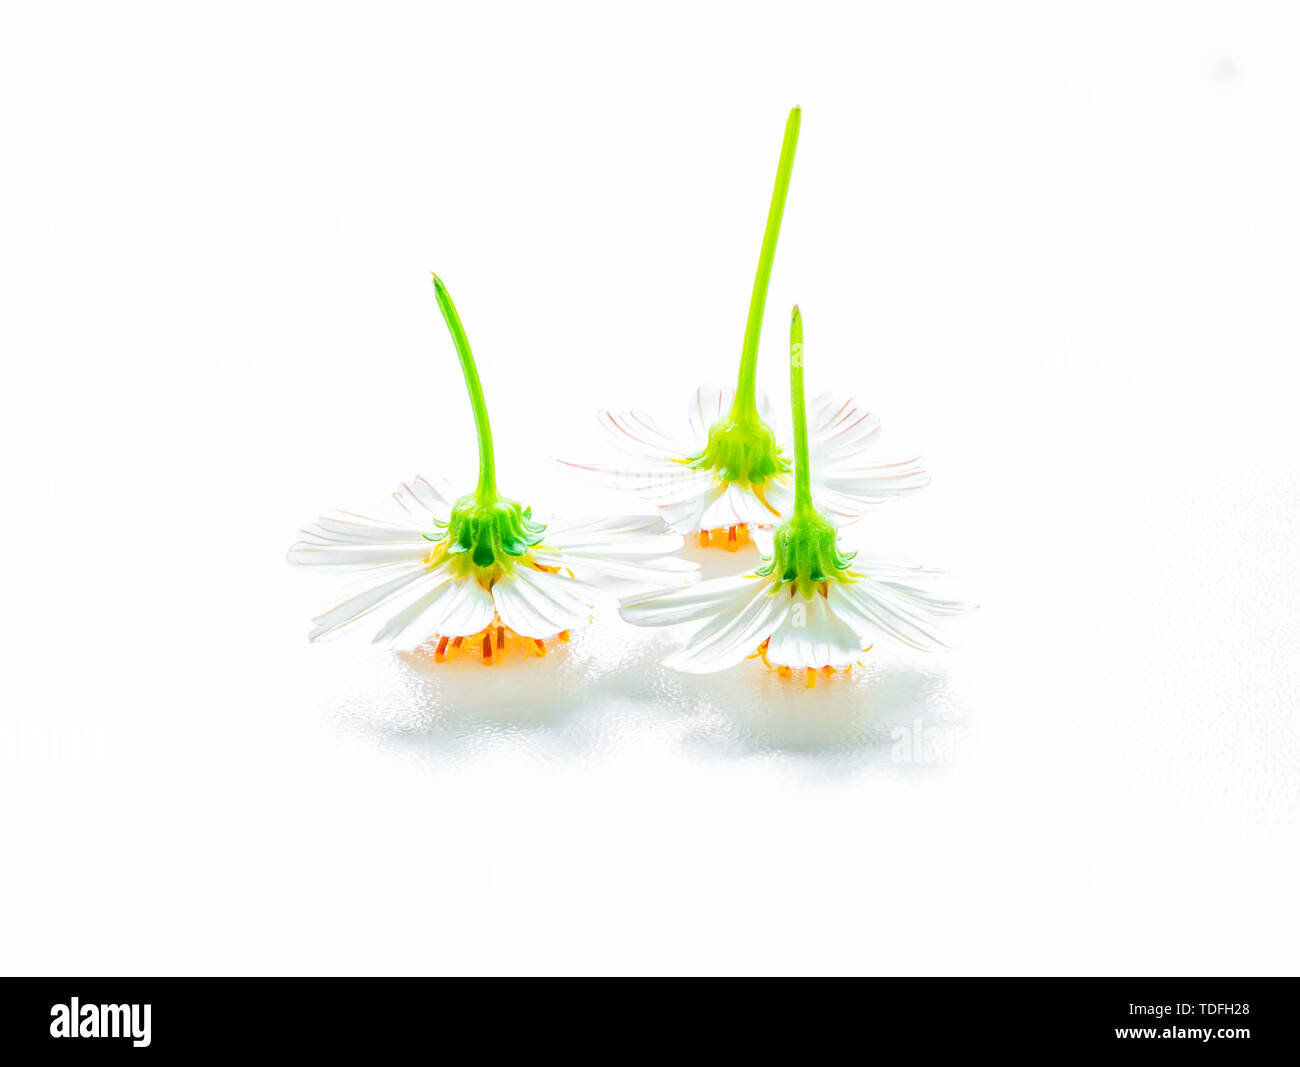 Flowers of a handstand fungus against a white background Stock Photo